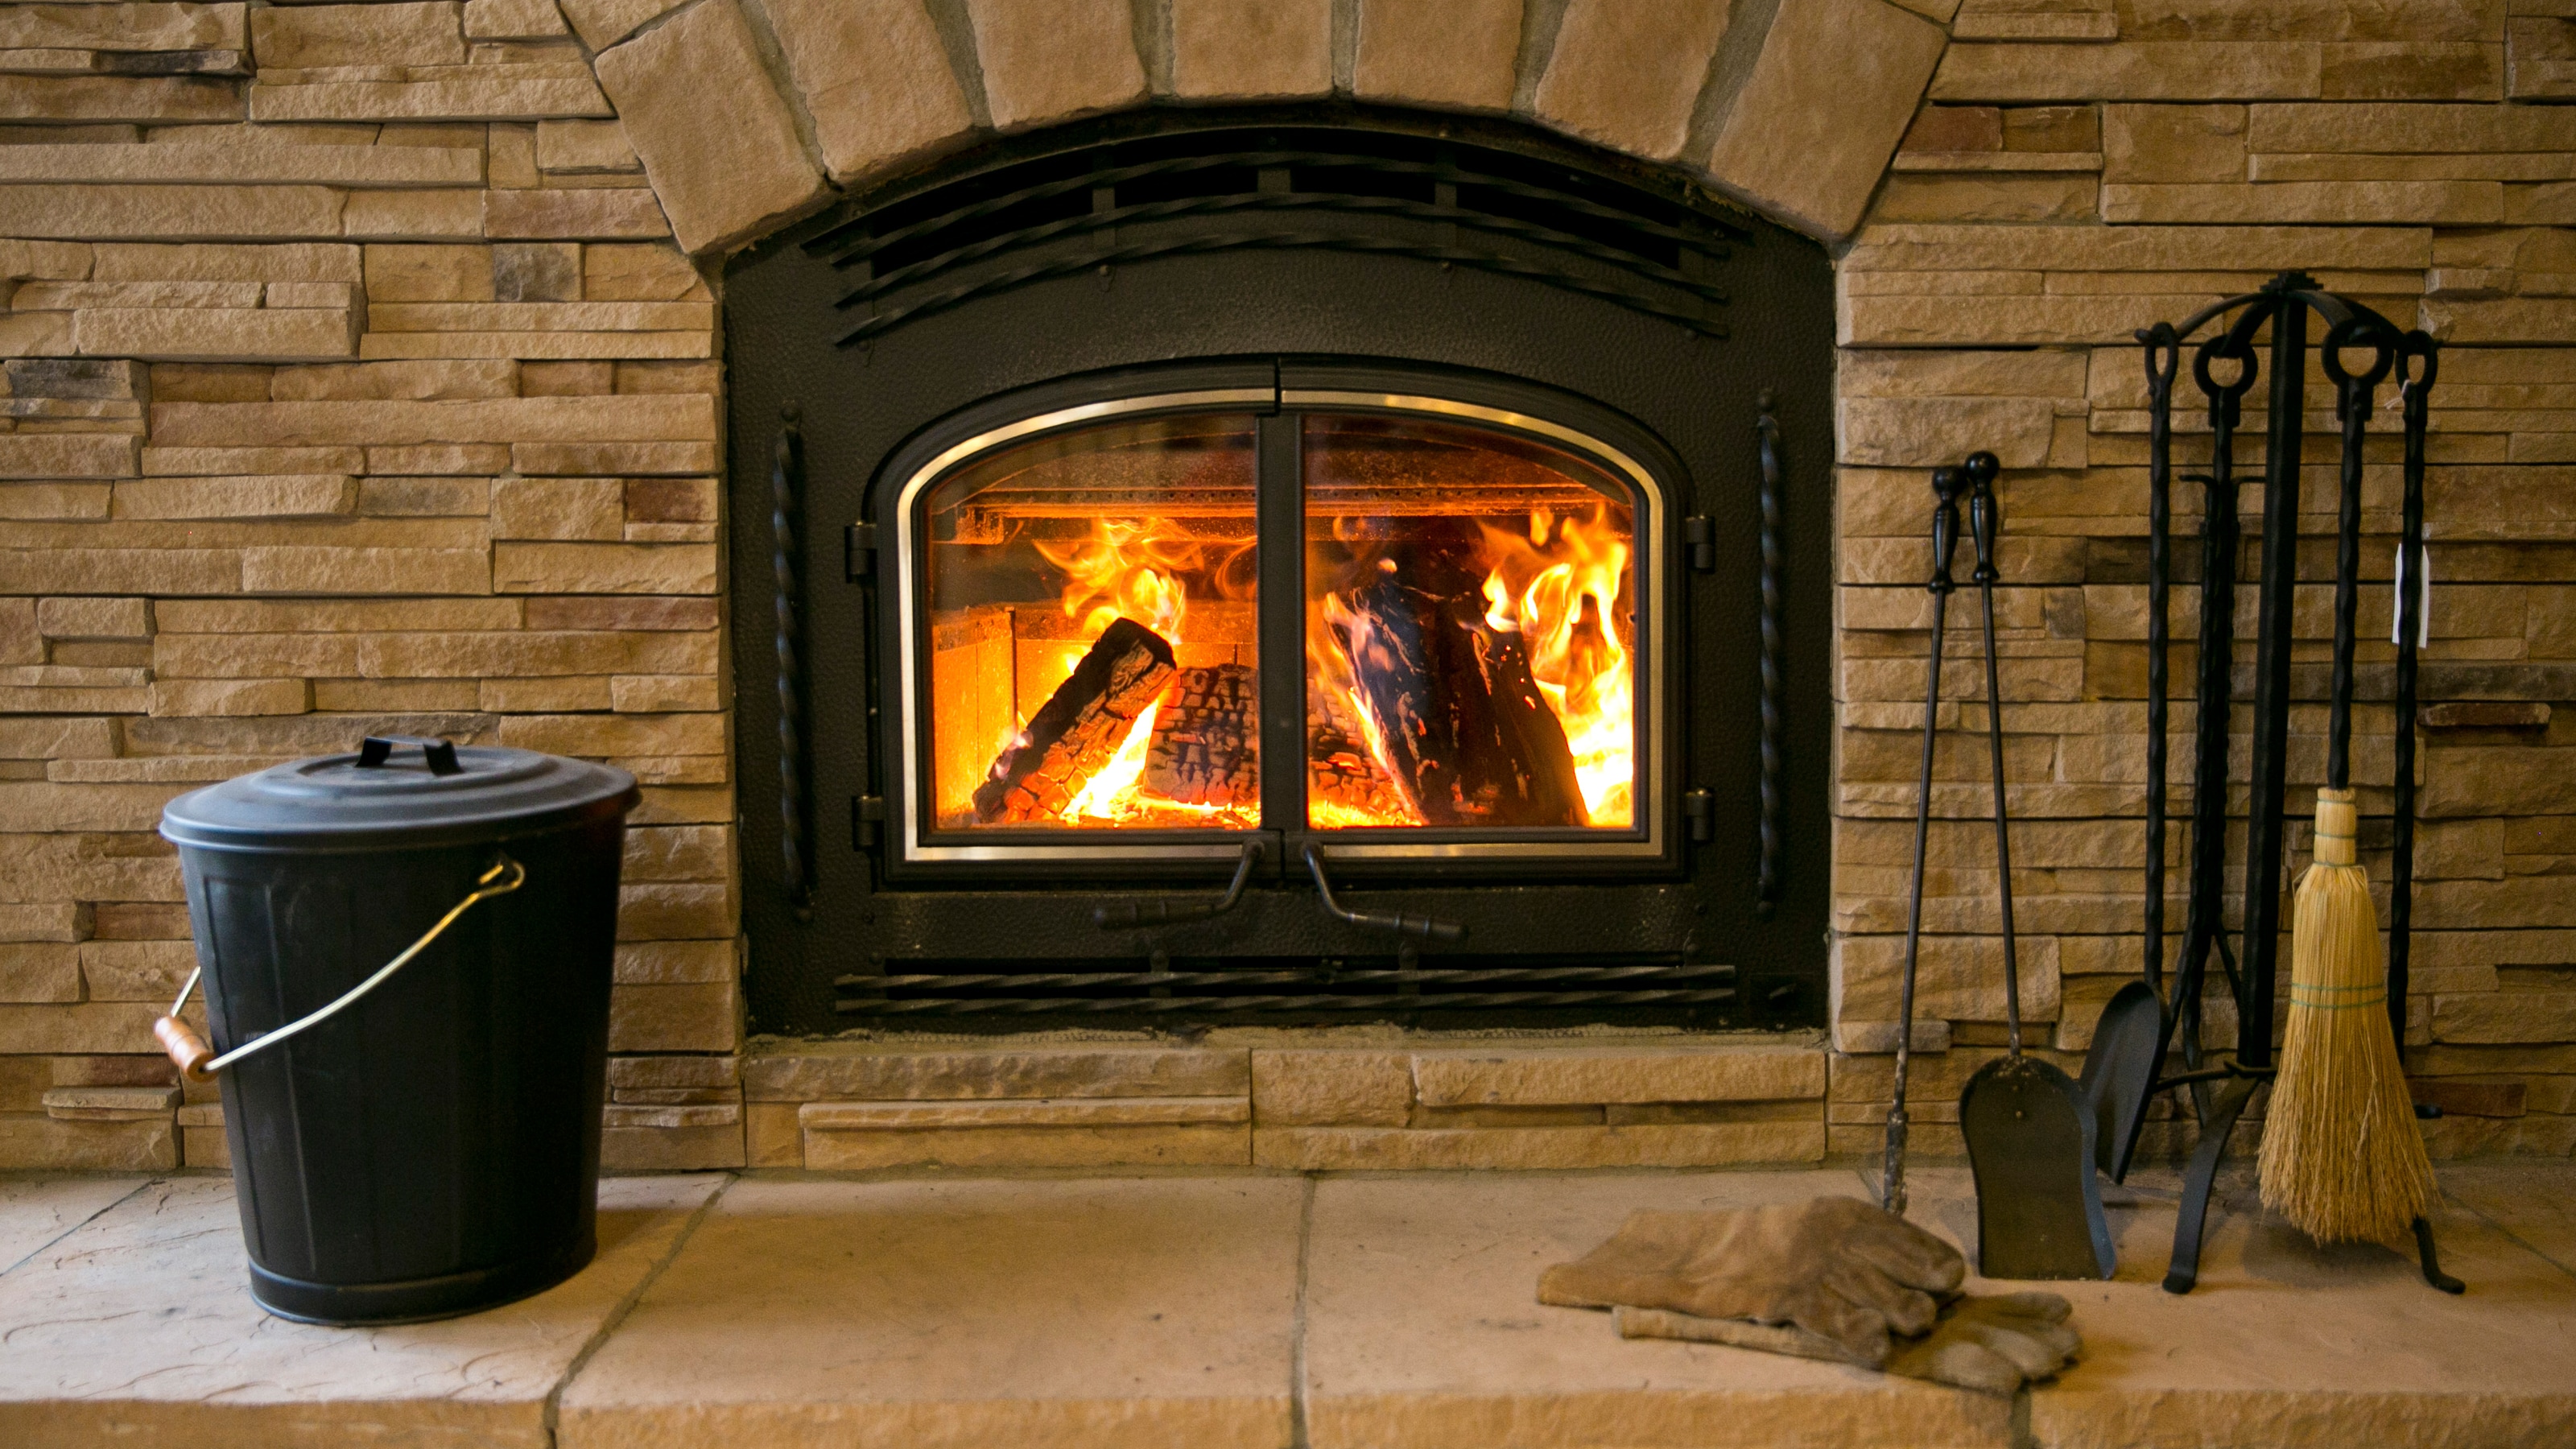 Fireplace Glass Doors for Sale Luxury How to Convert A Gas Fireplace to Wood Burning